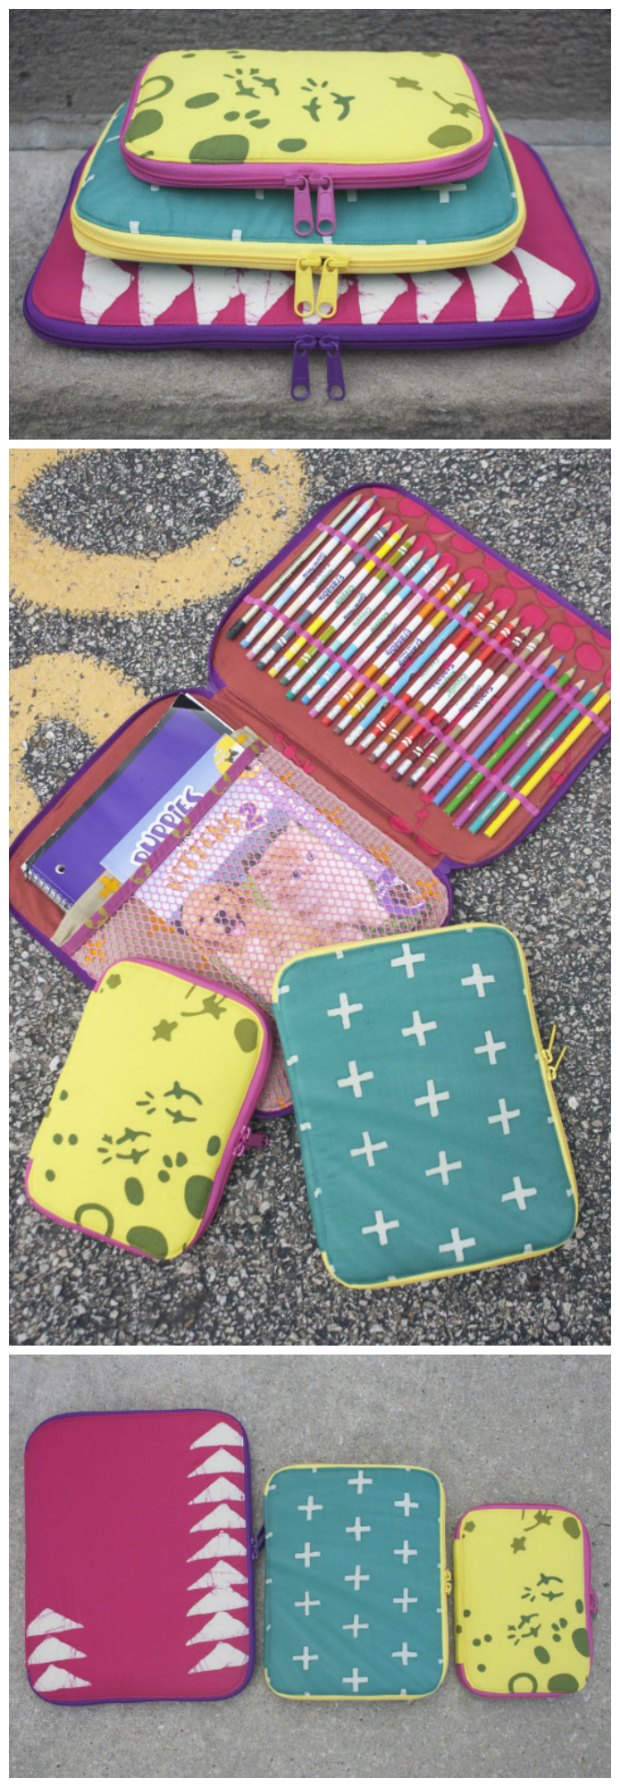 Sewing pattern for 3 different sizes zipper cases. Perfect for organisers, kids art supplies, diabetic supplies case, sewing supplies, crochet etc. Got to have this pattern in your stash.